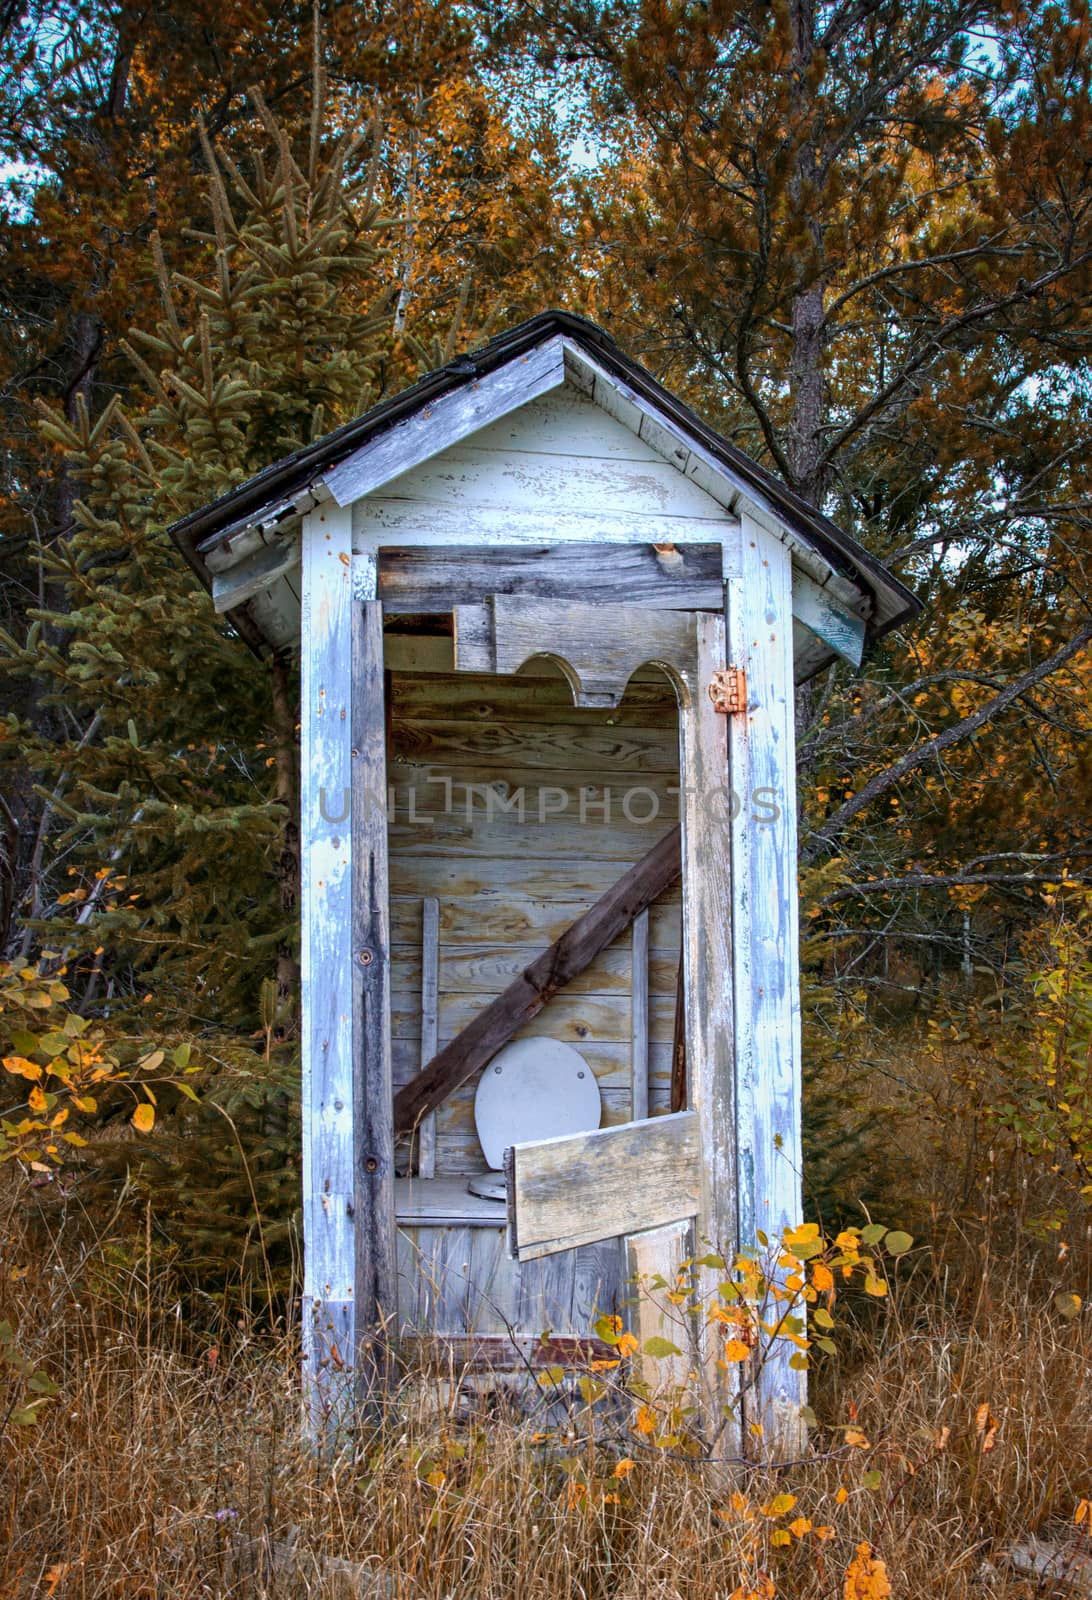 Dilapidated Outhouse in the Rural Wisconsin Countryside